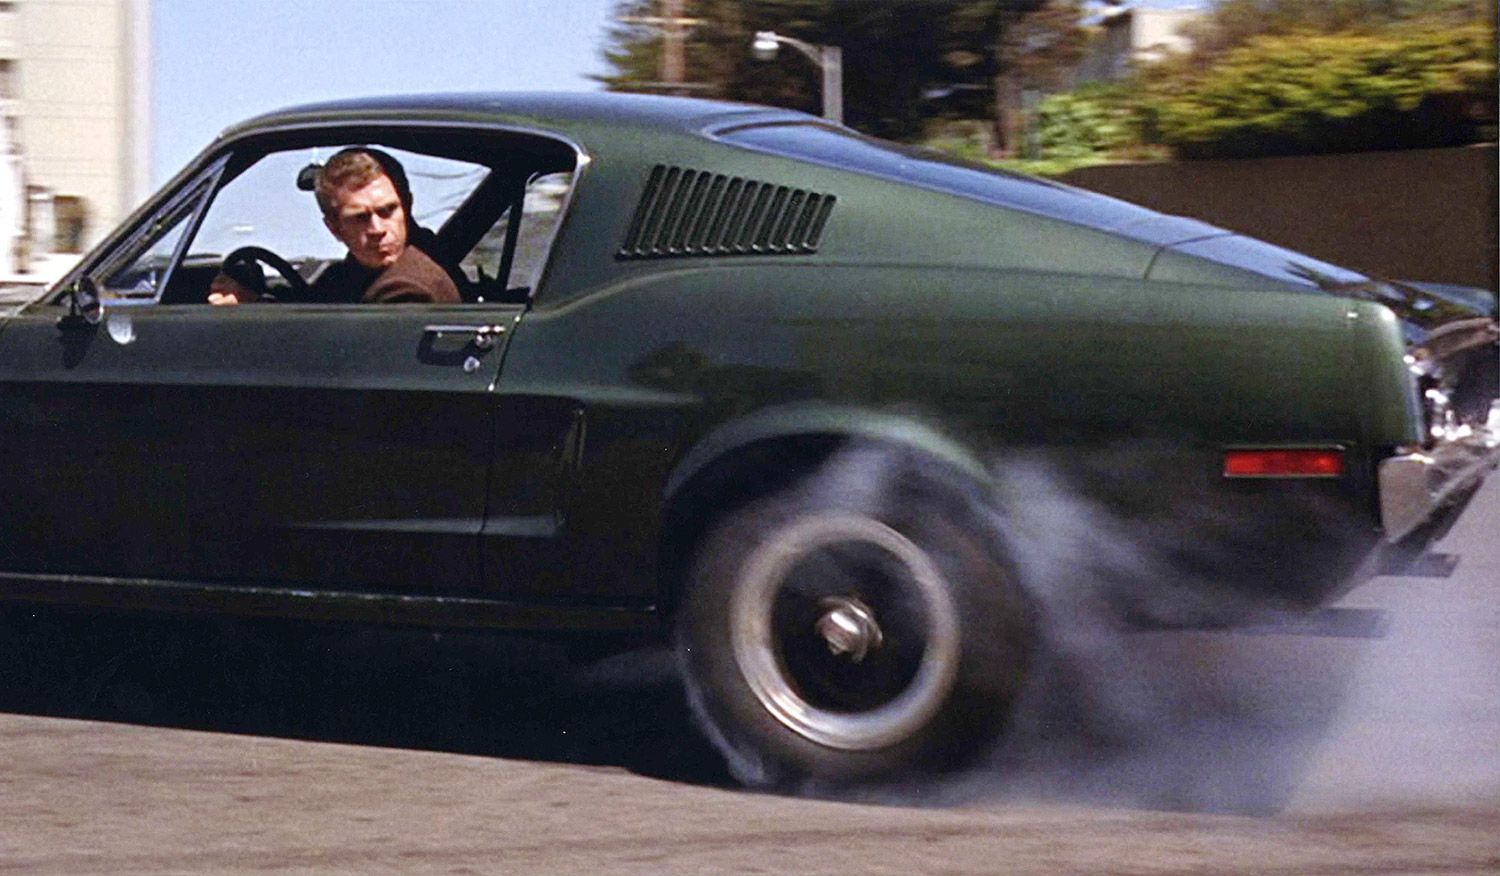 The Bullitt car chase is considered one of the best on screen car chases